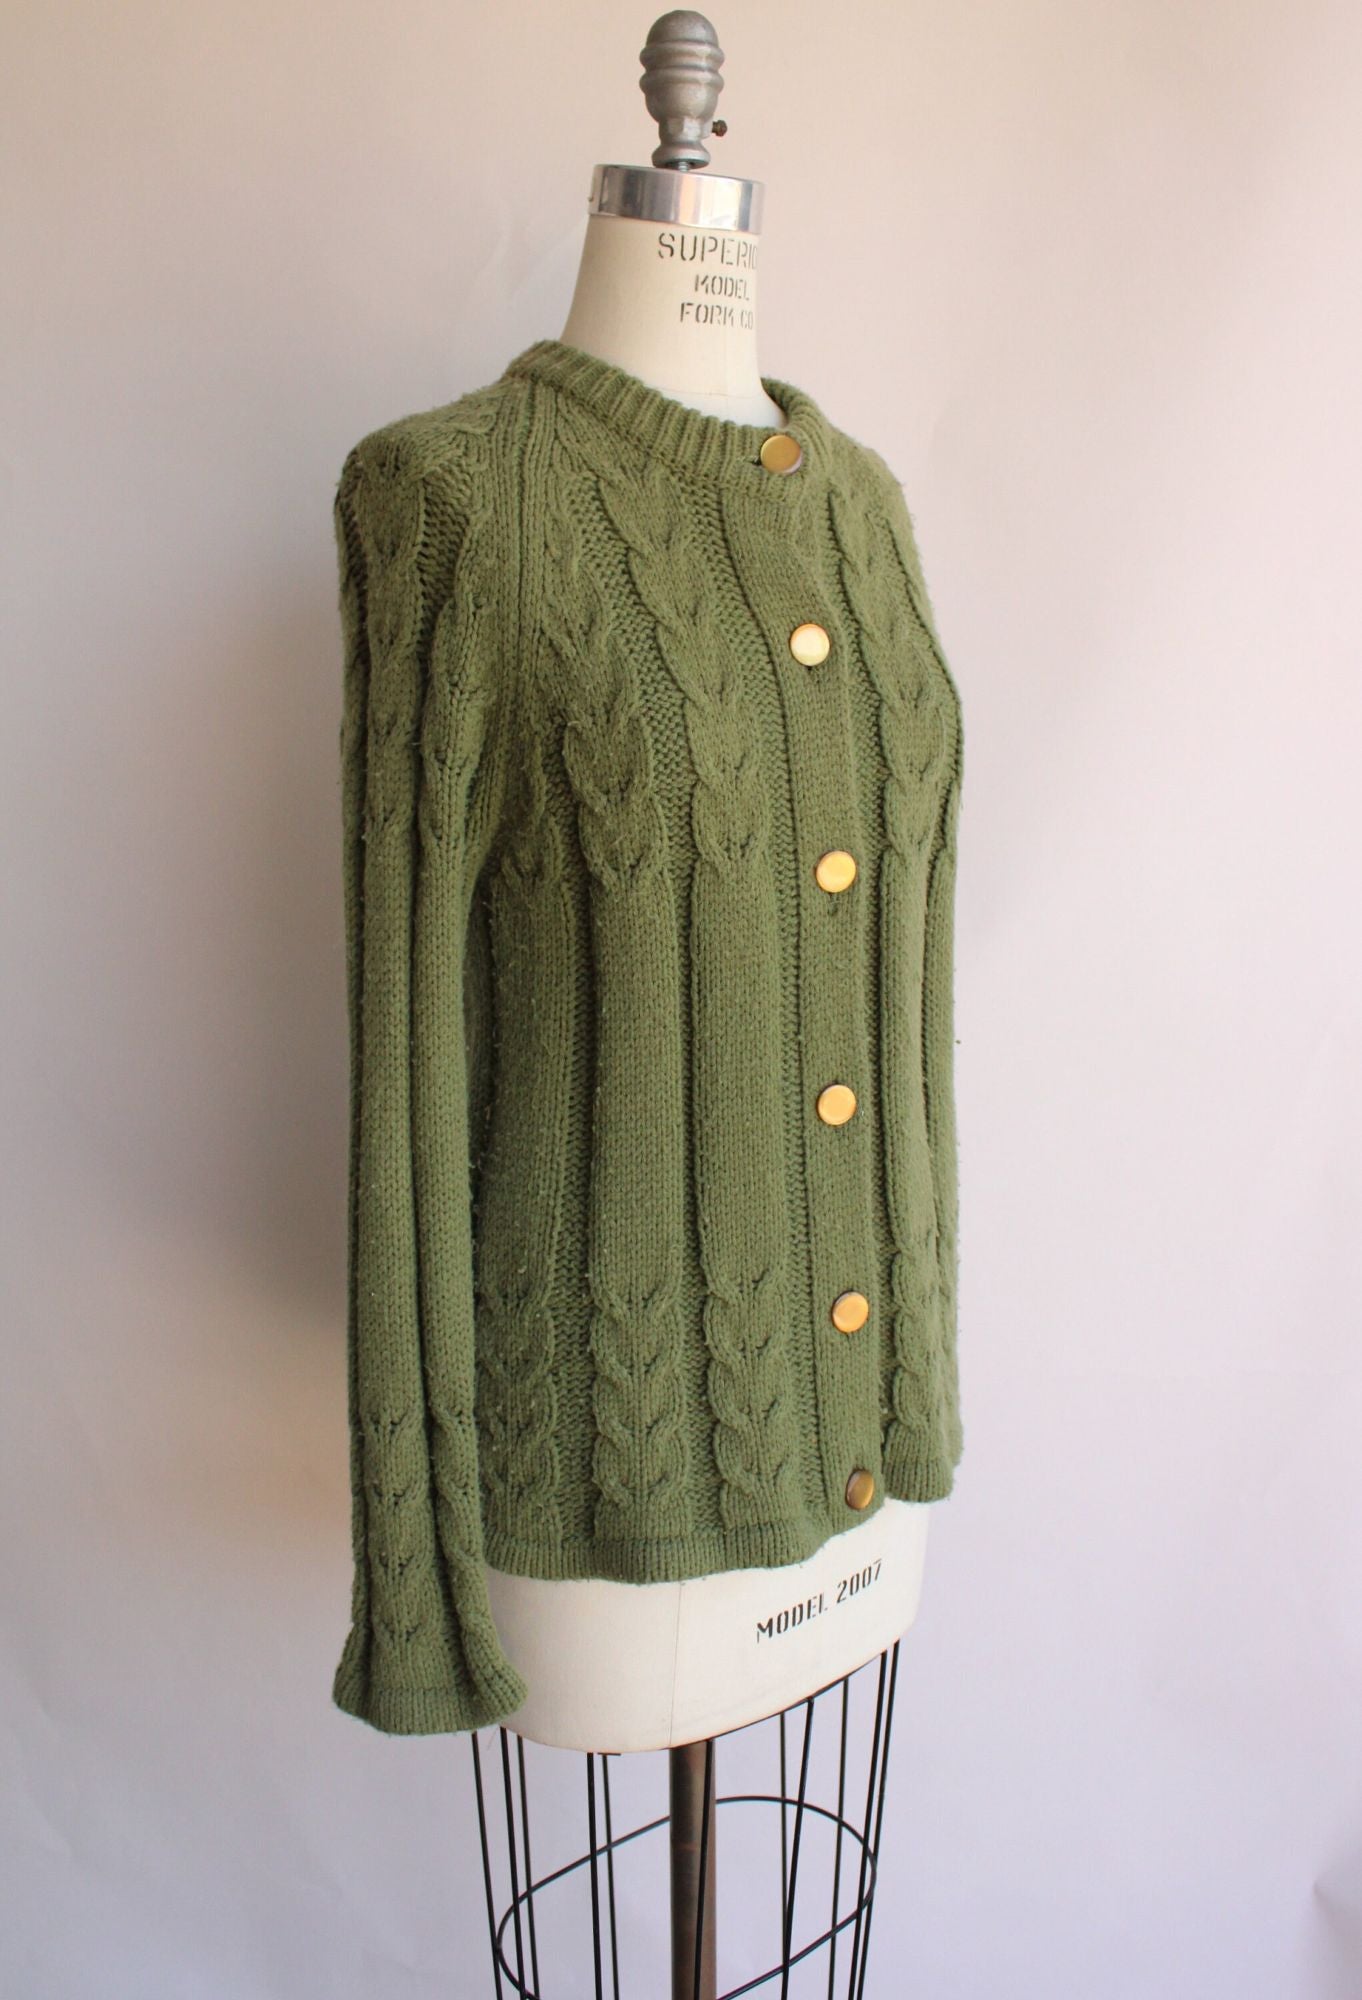 Vintage 1970s Cable Knit Green Cardigan with Pockets